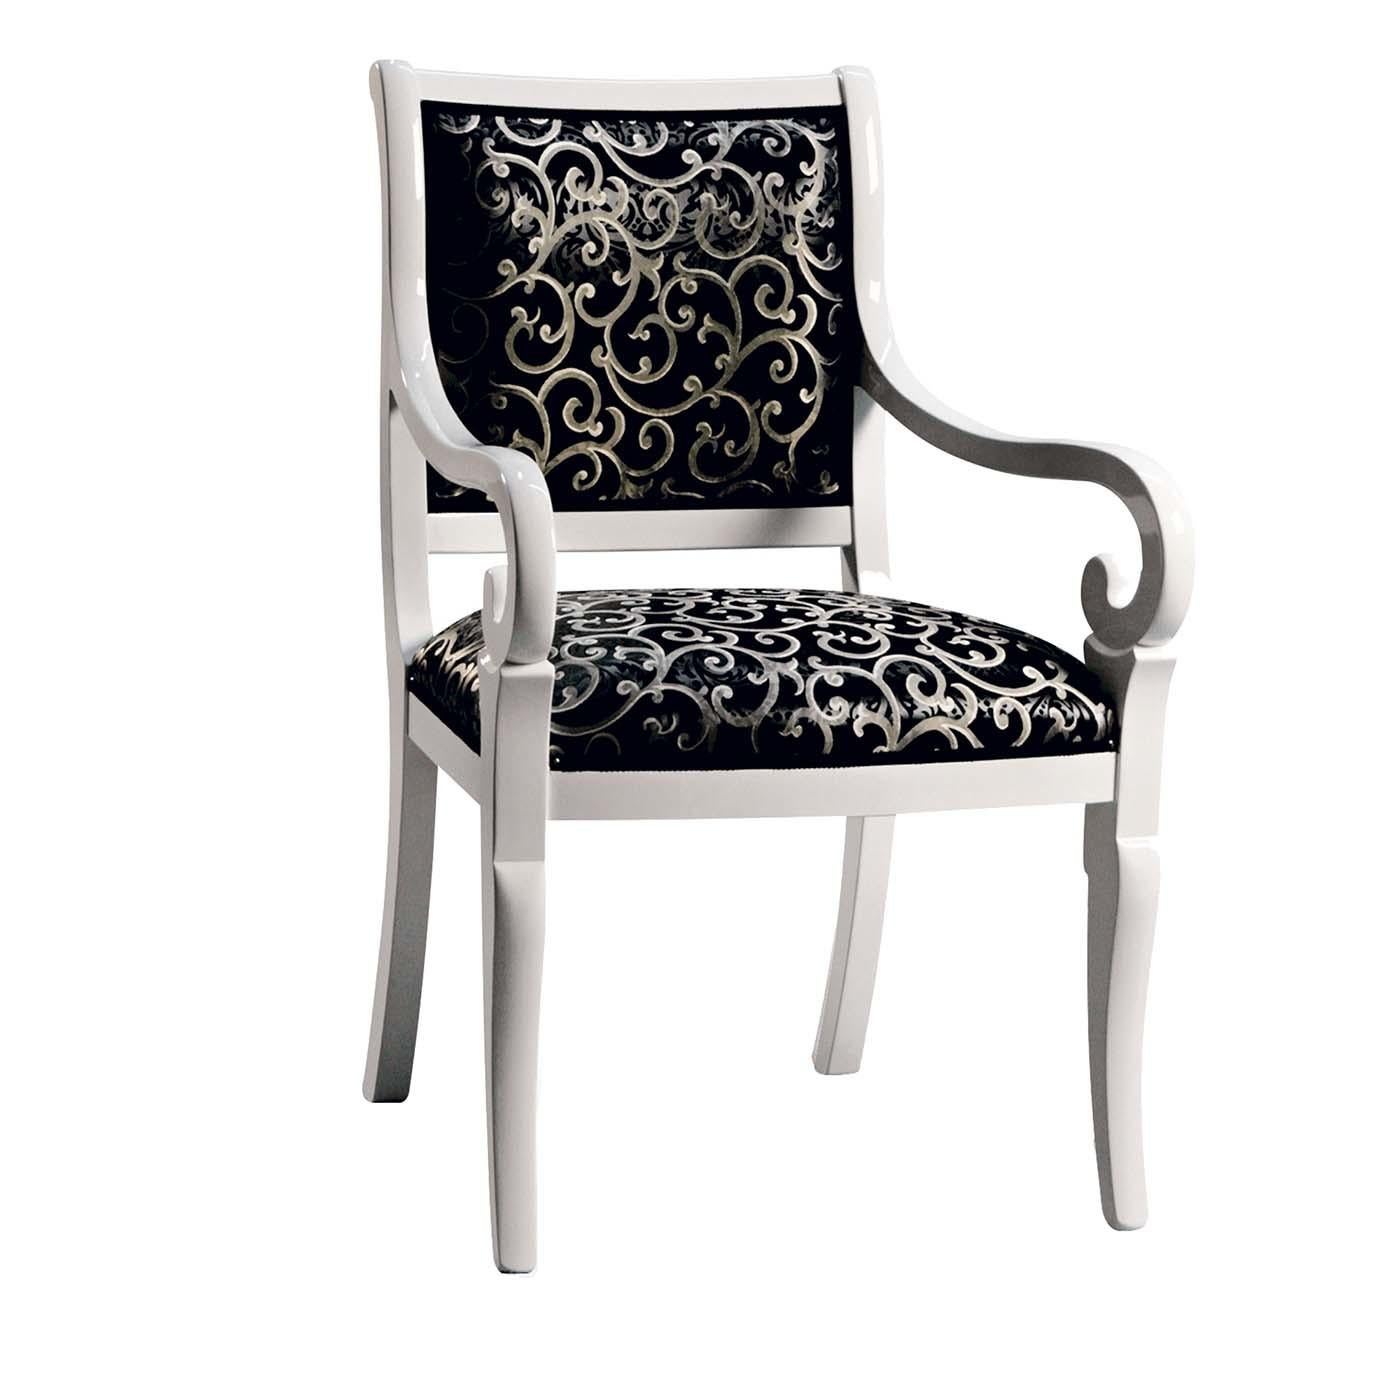 Italian Capotavola Black and White Chair with Armrests